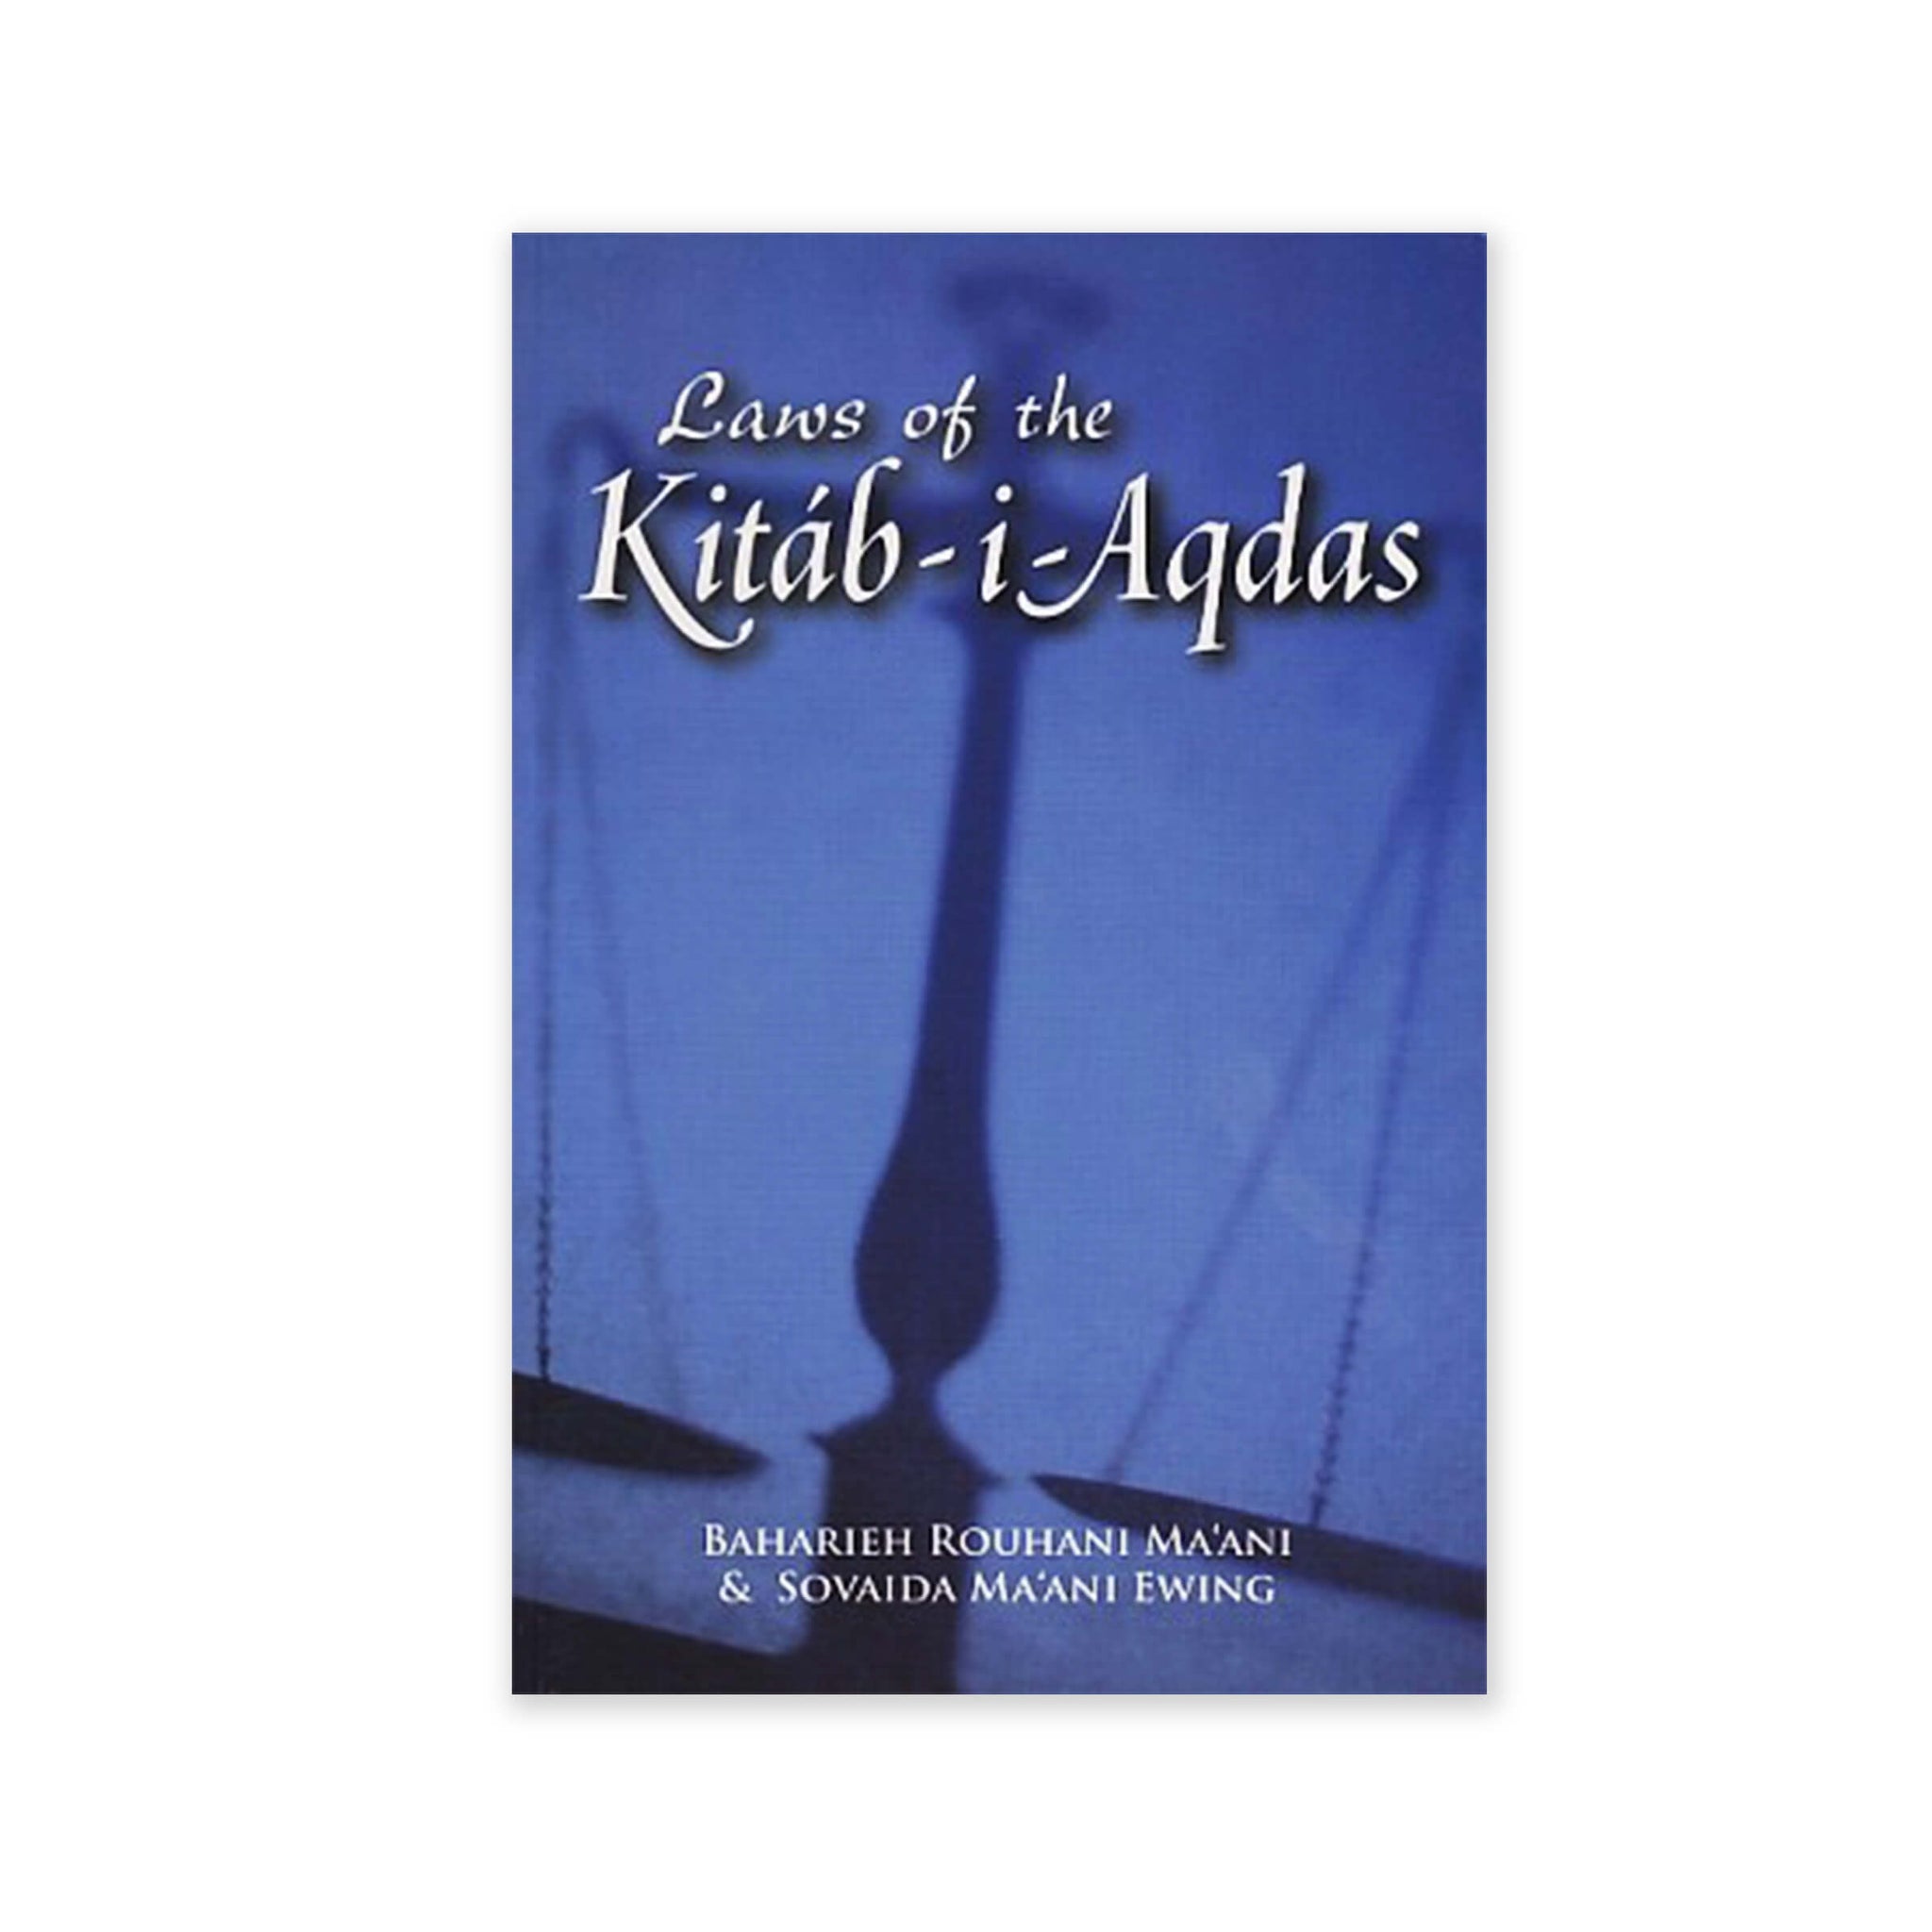 Laws of the Kitab-i-Aqdas - The Laws of Baha'u'llah Placed in Their Historical Context